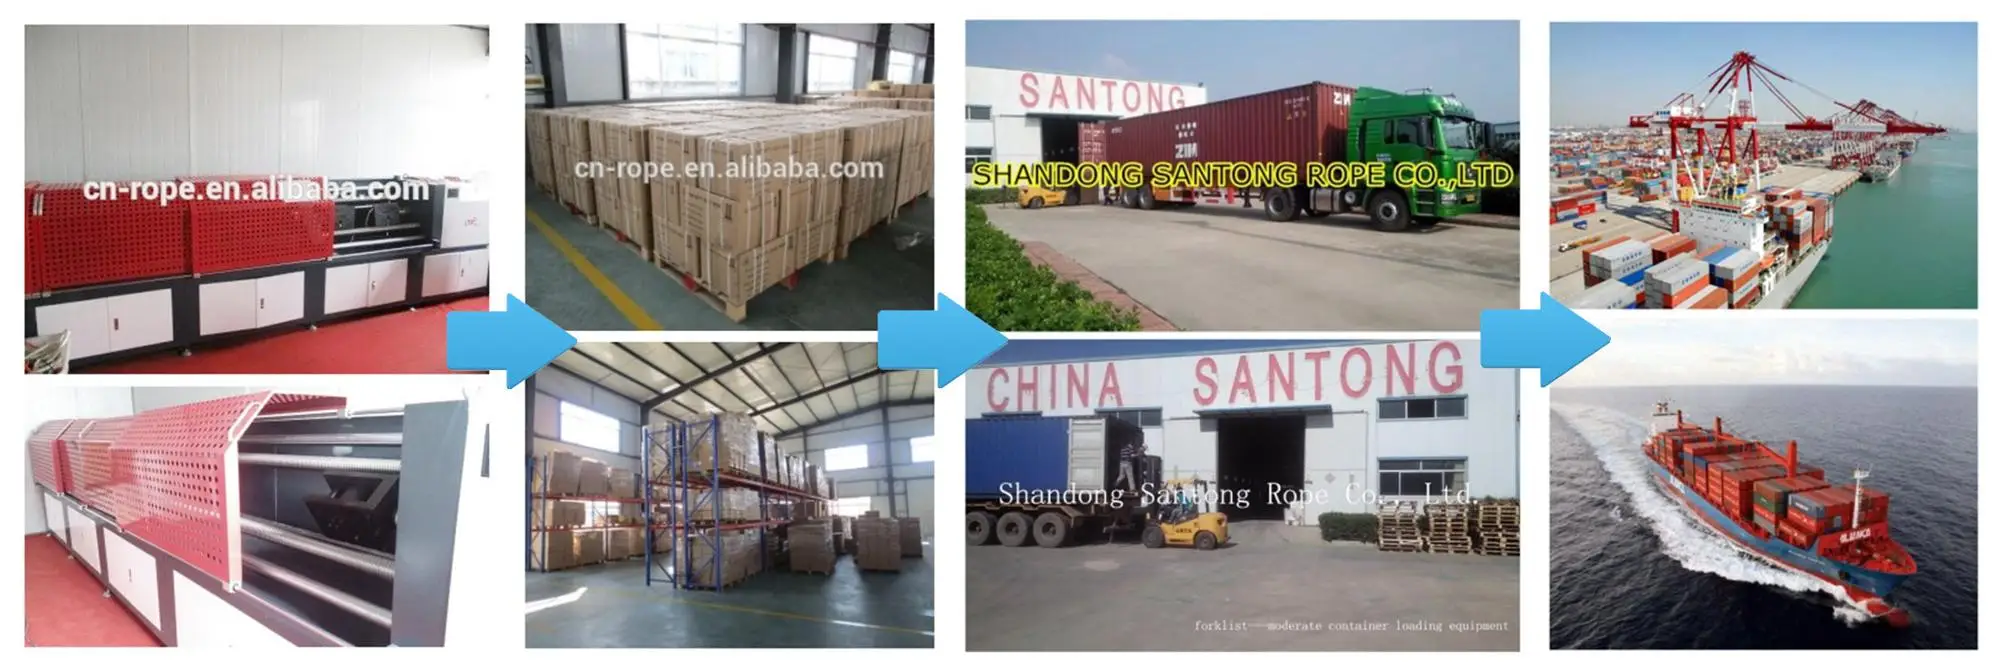 dock line, 3/8"*15', etc, popular in American market, factory in China